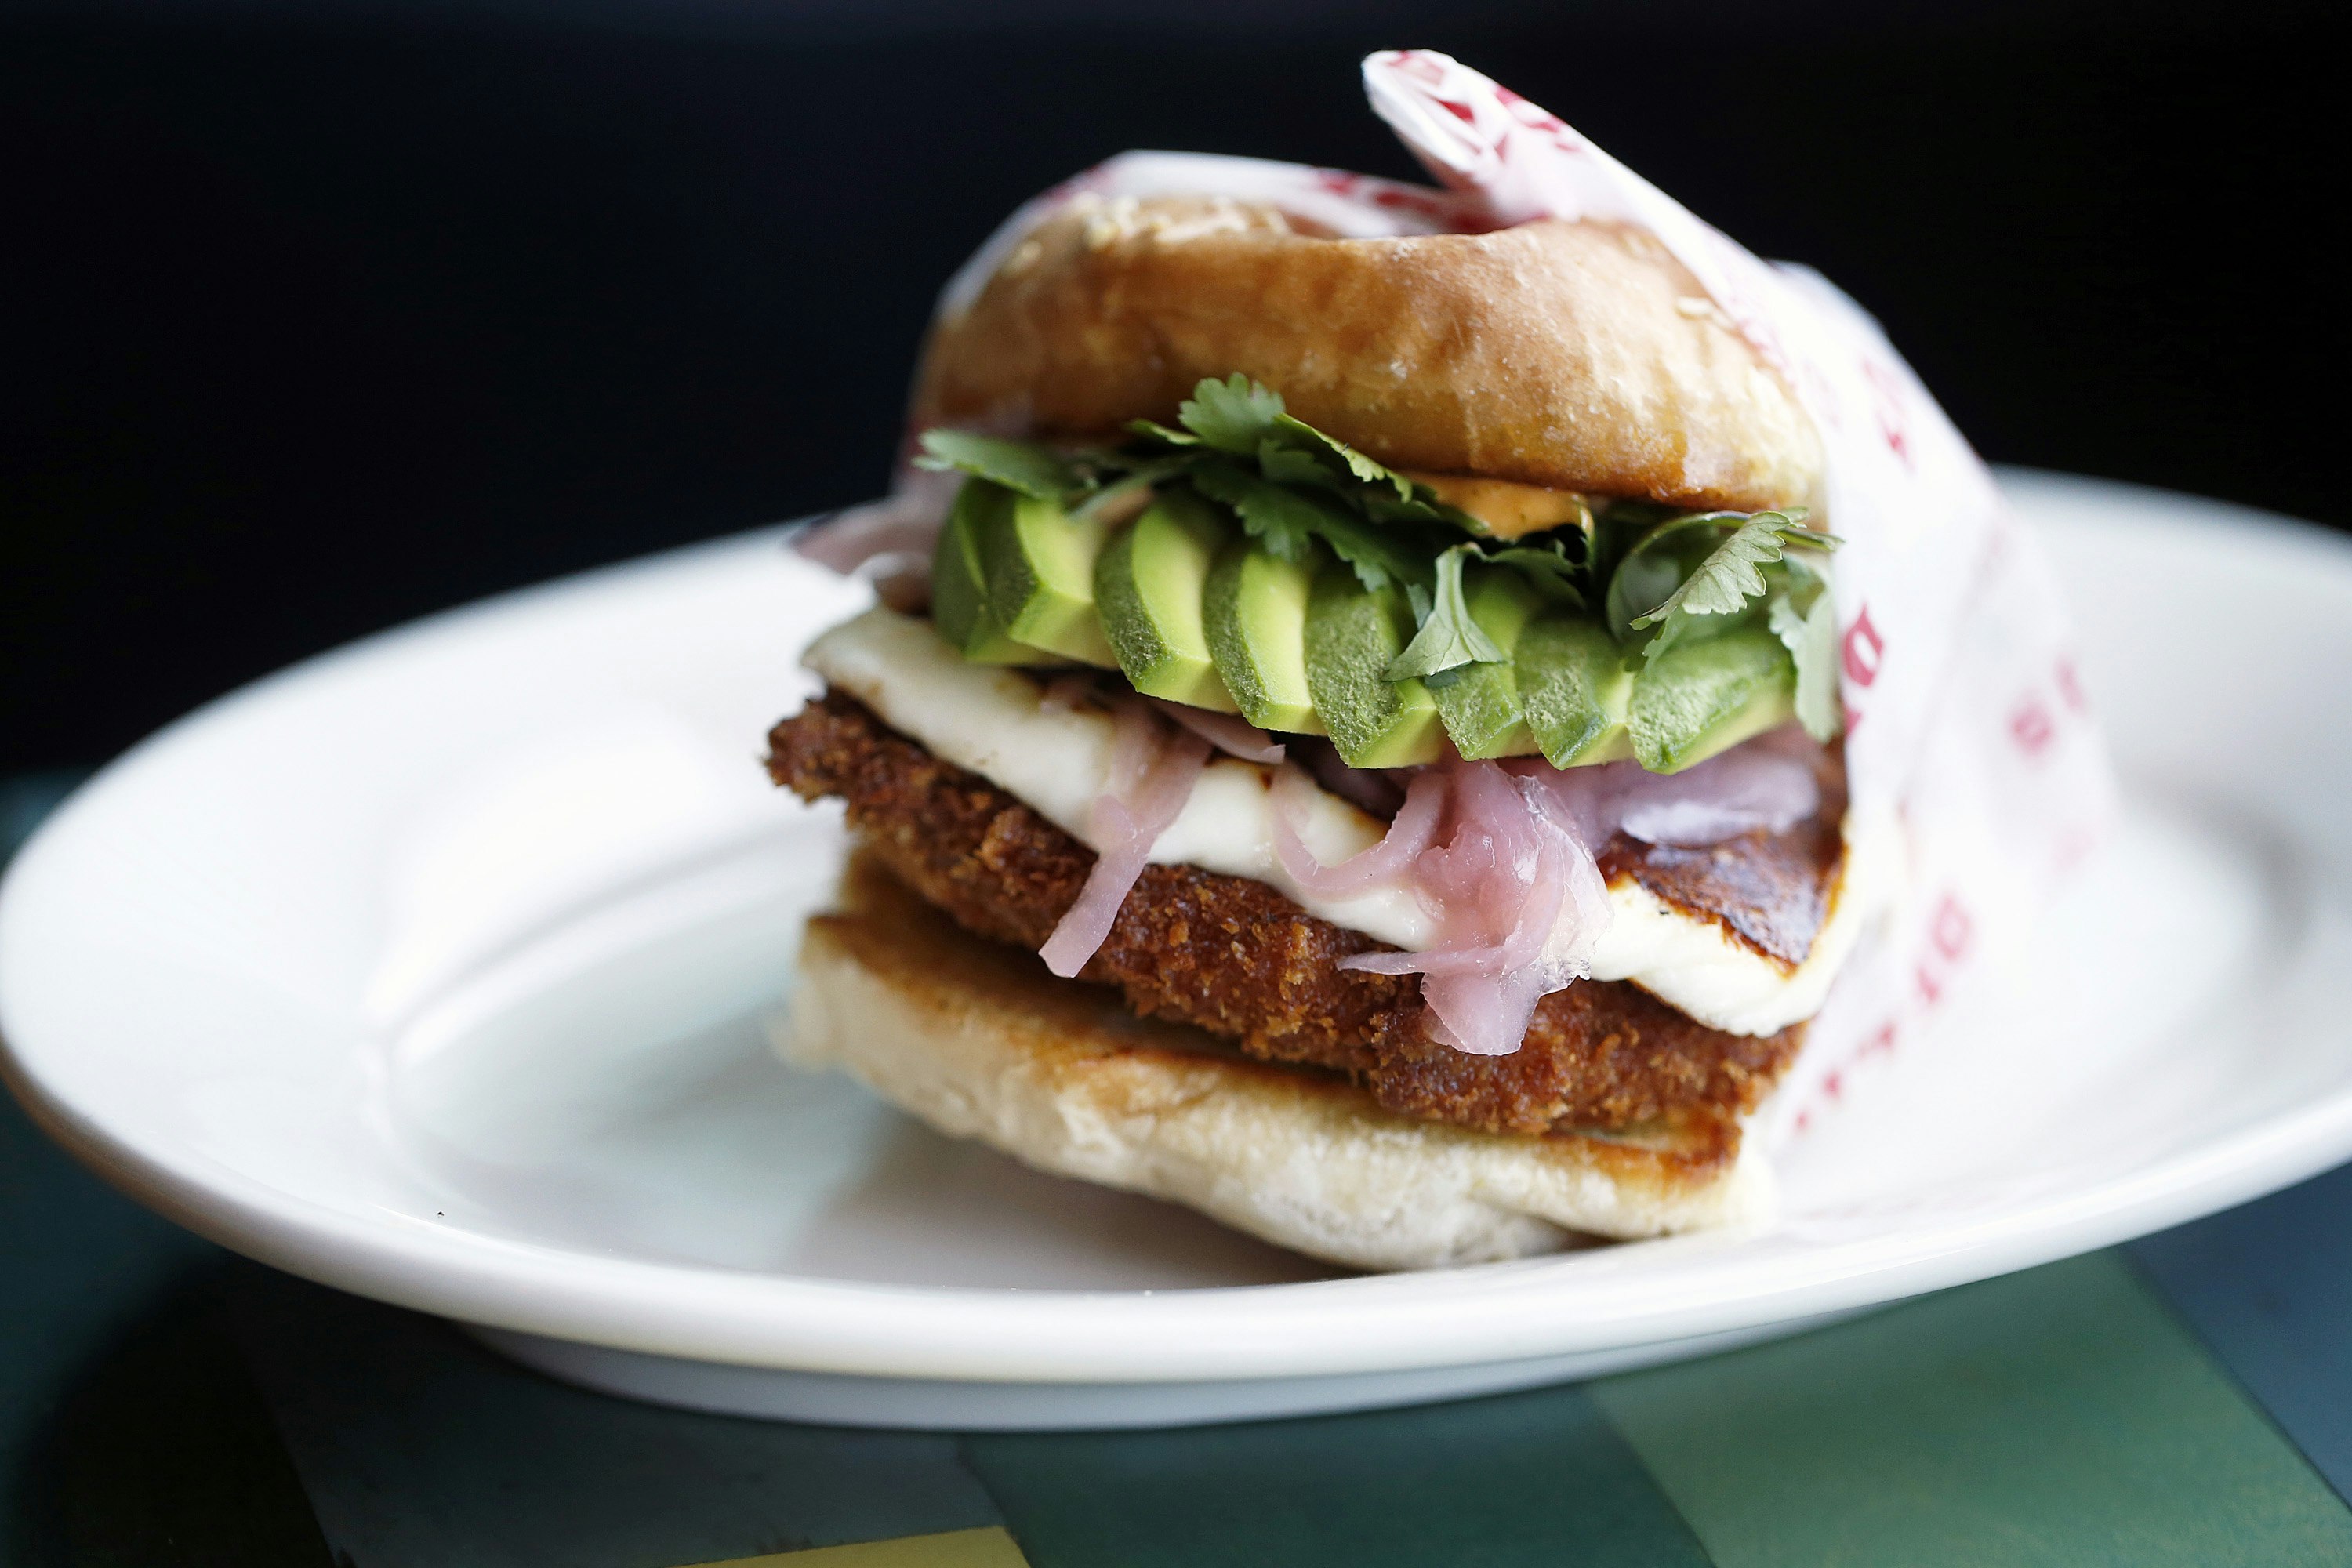 A cemita sandwich sits on a white plate. The bun is filled with breaded, deep-fried meat, onions, lettuce, cheese and avocado.